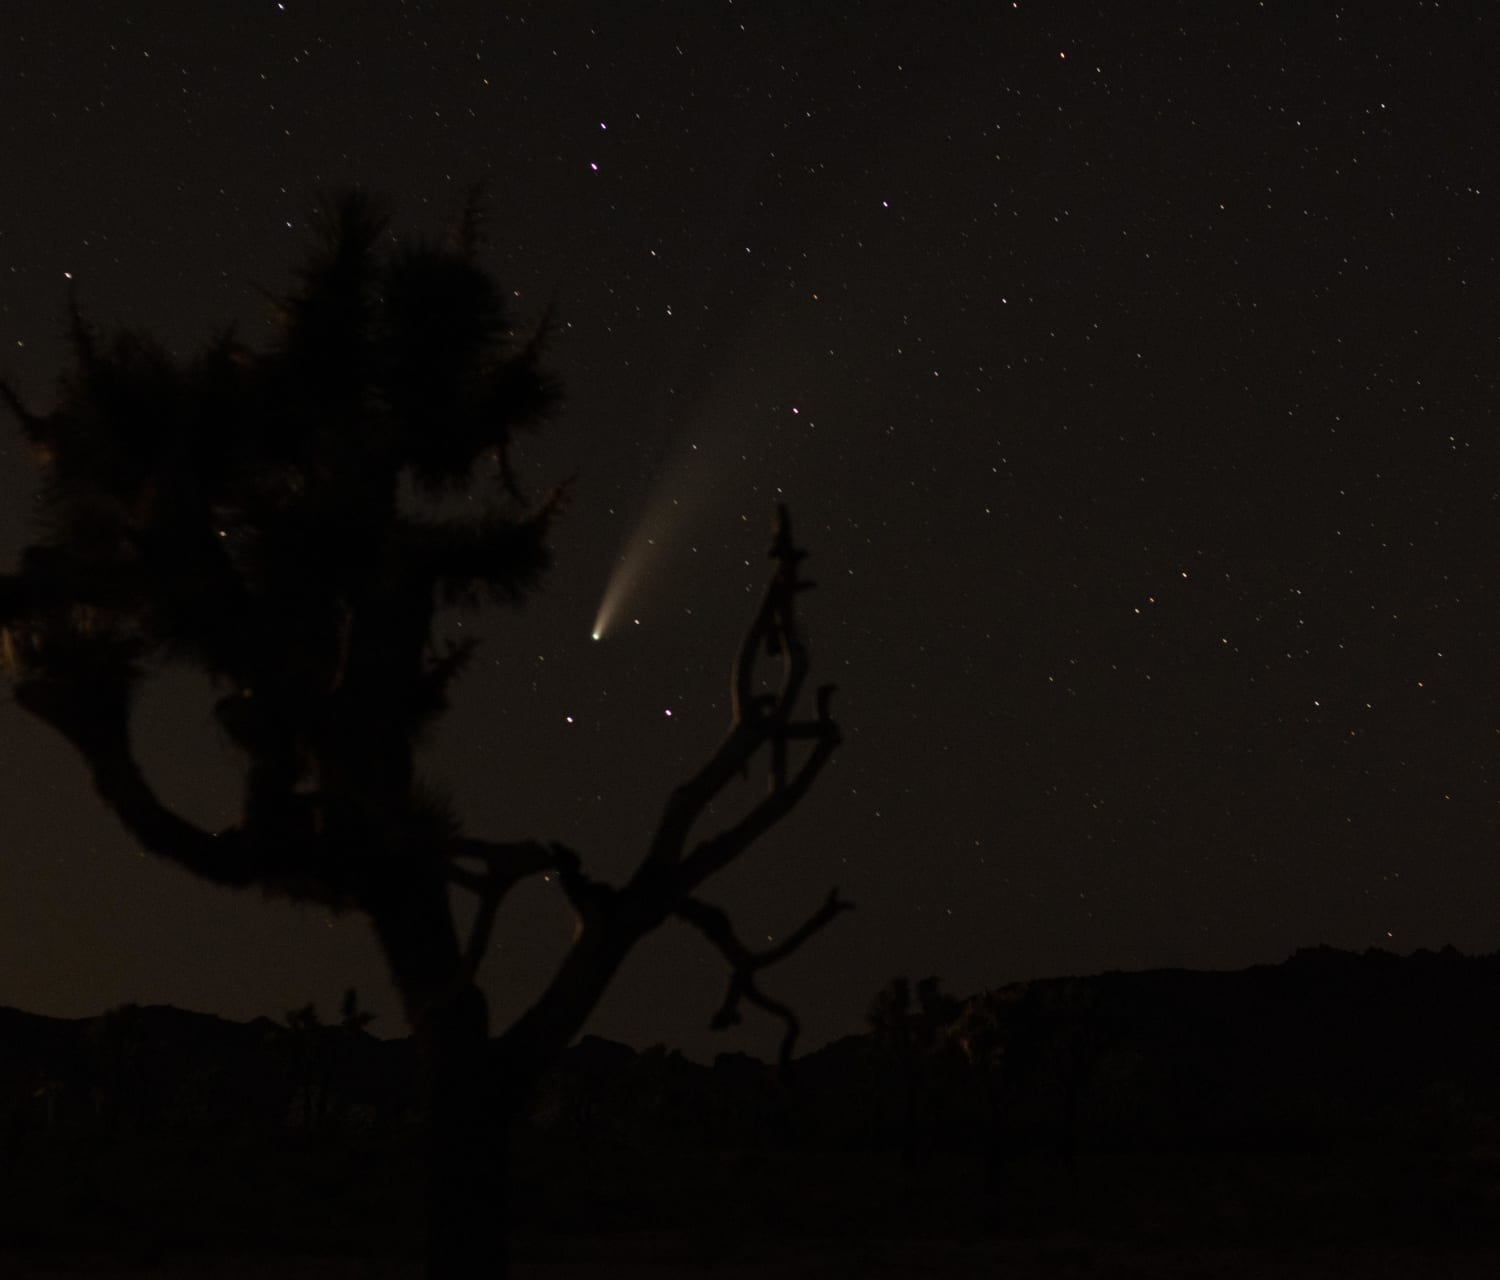 Neowise at Joshua Tree CA